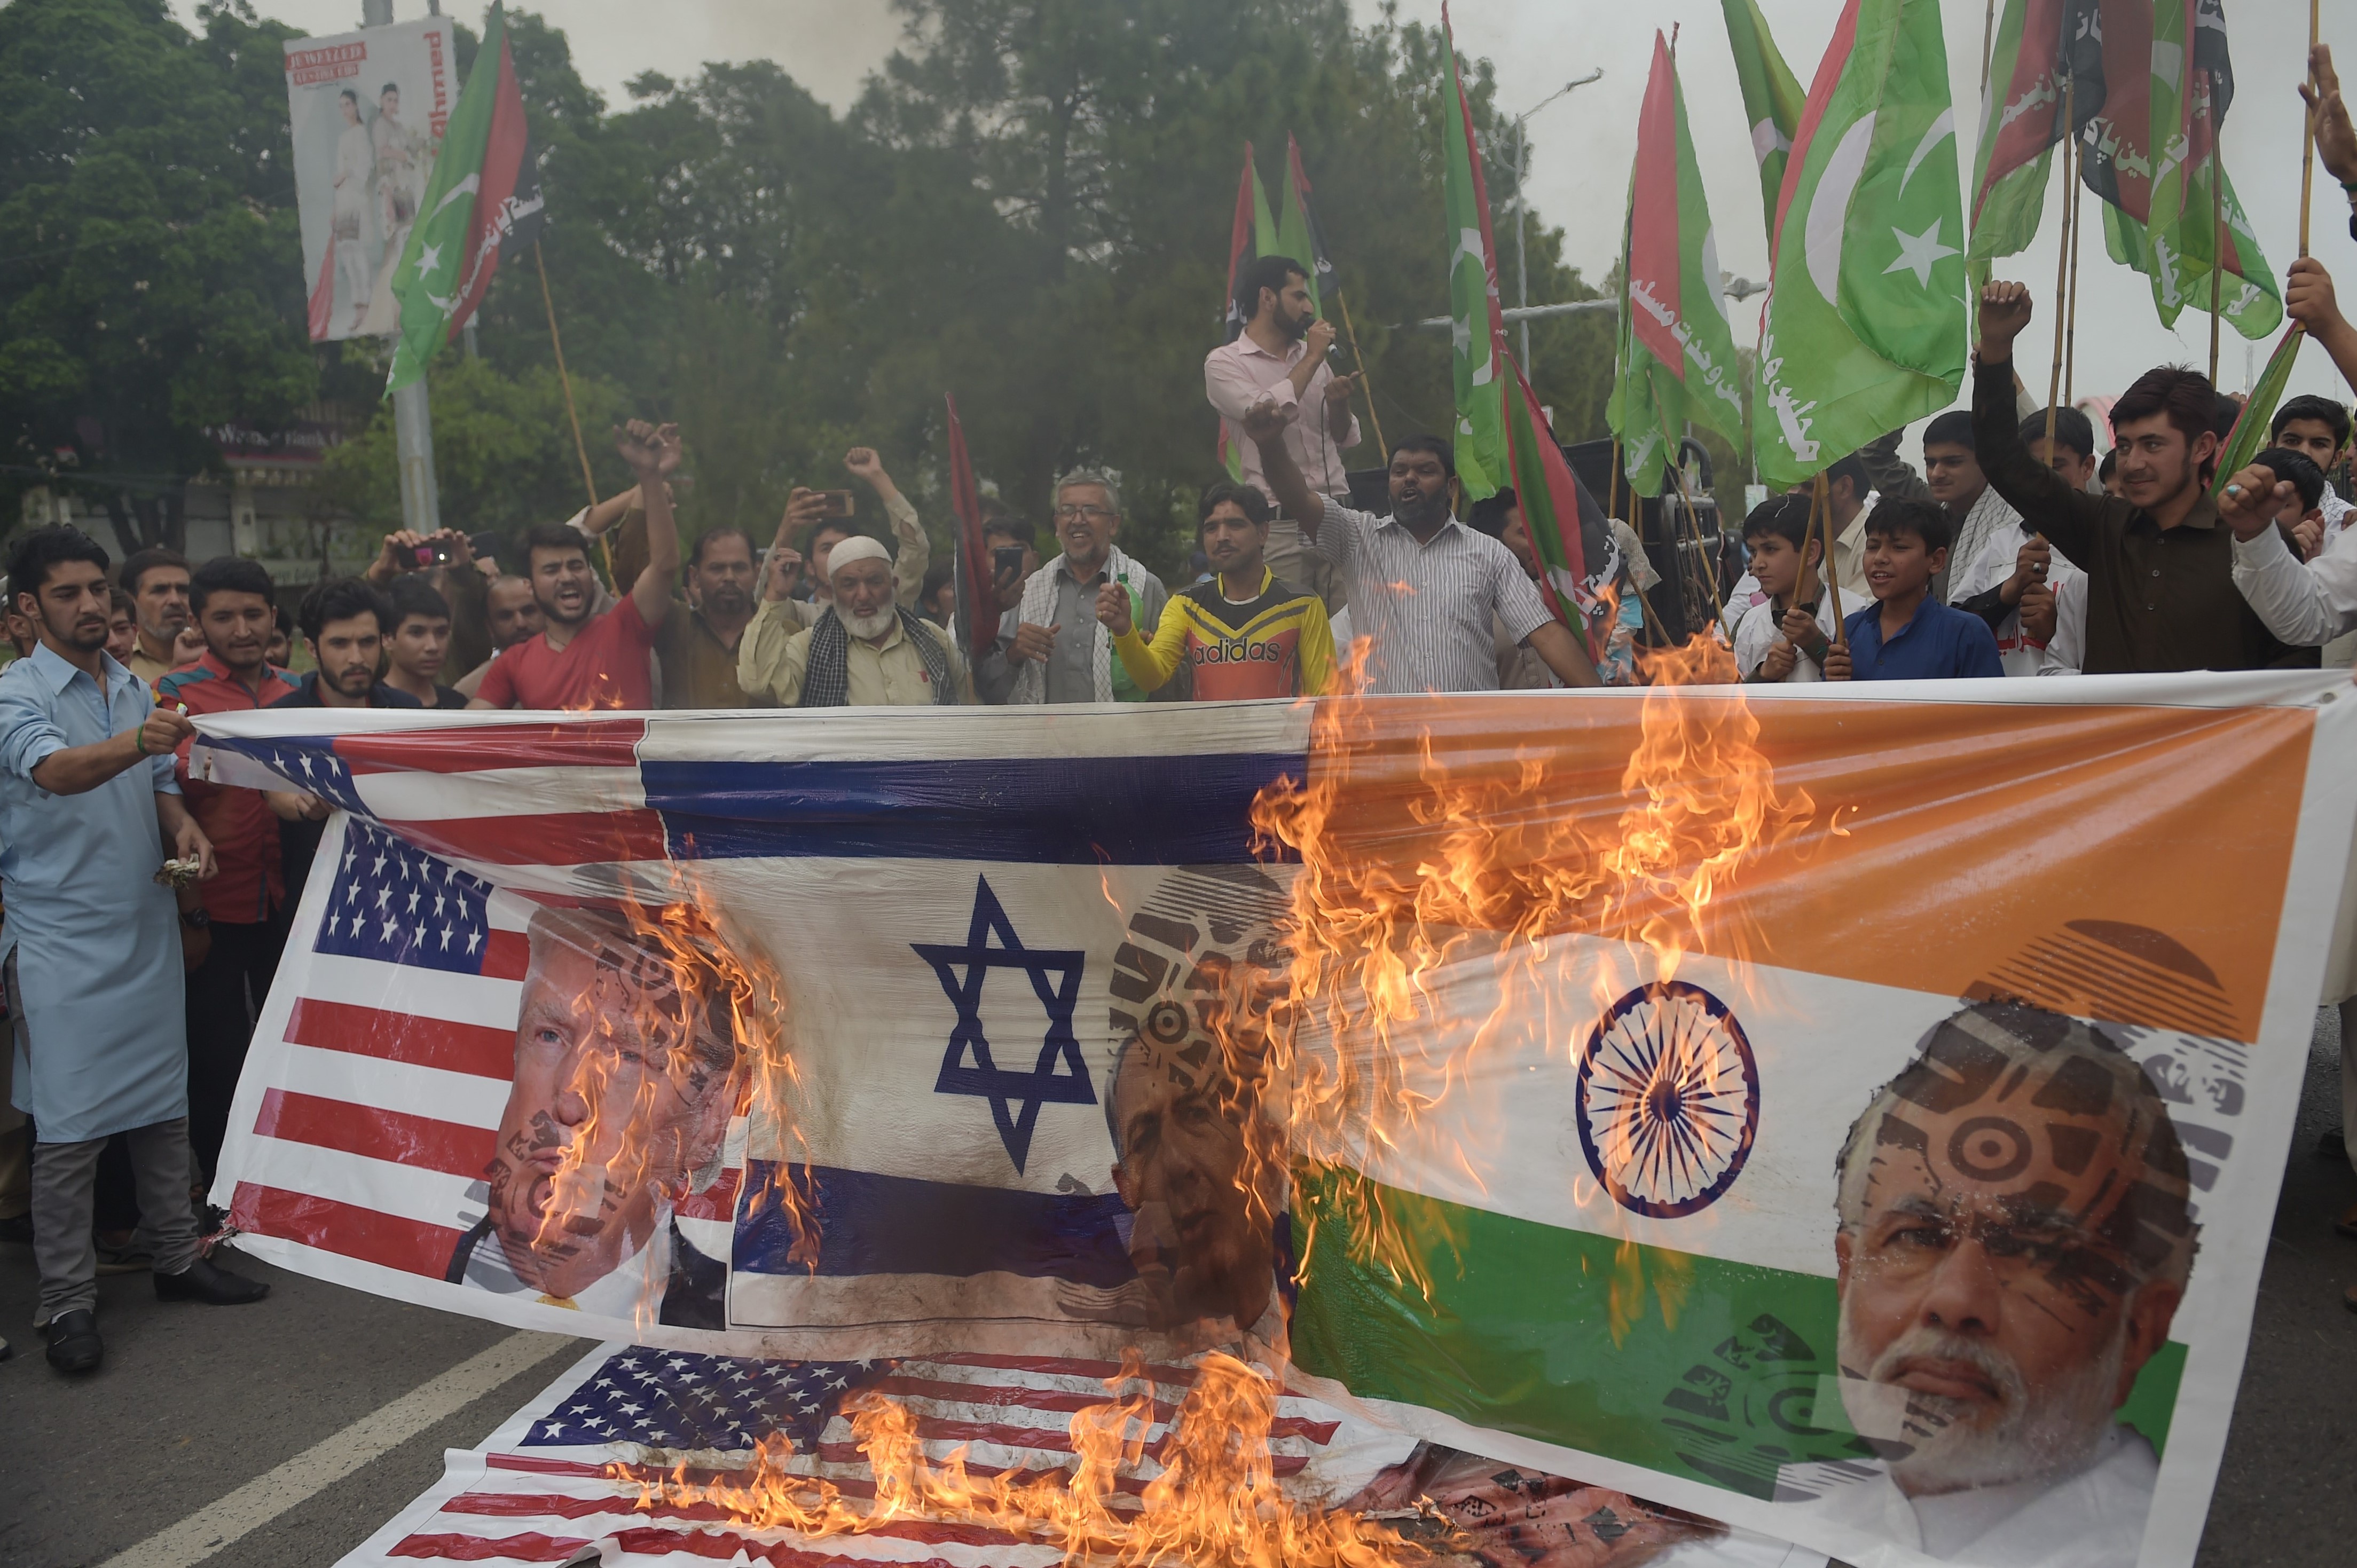 Pakistani activists burn a banner bearing the images of Modi, Netanyahu and Trump during a protest against the opening of the American embassy in Jerusalem in Islamabad on 13 May, 2018 (AFP)